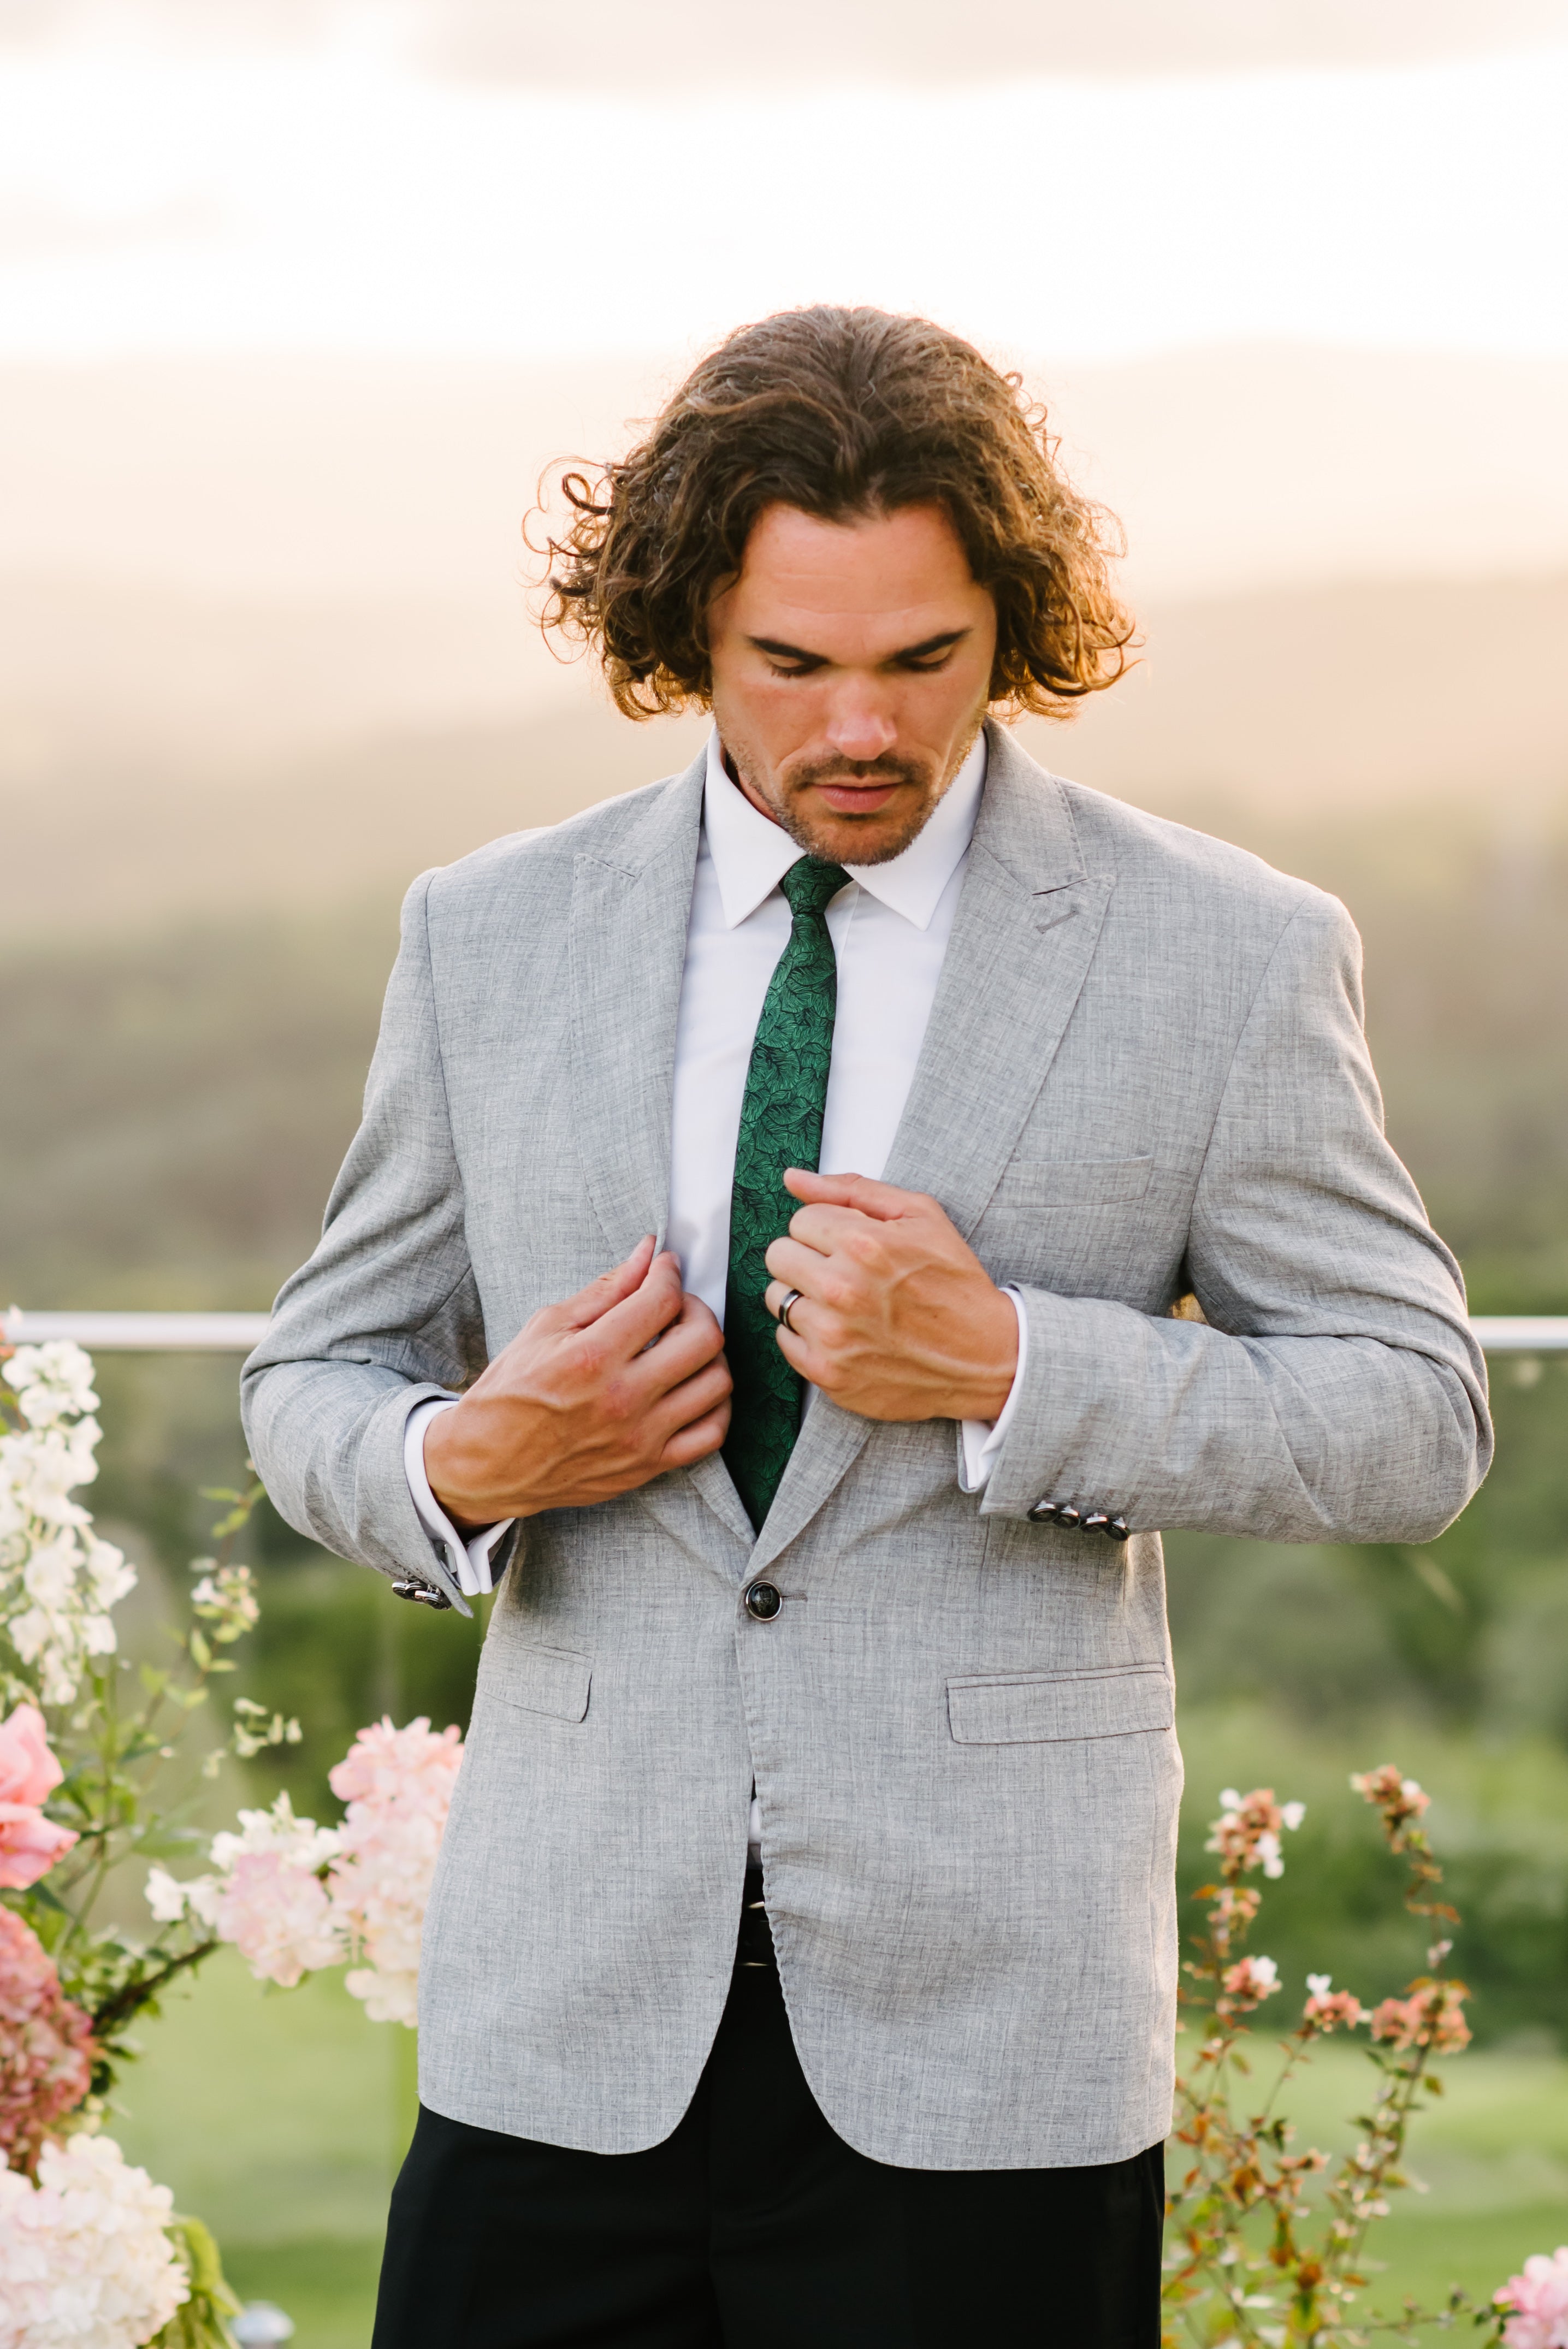 The Best Charcoal Grey Suit Combinations - Hockerty